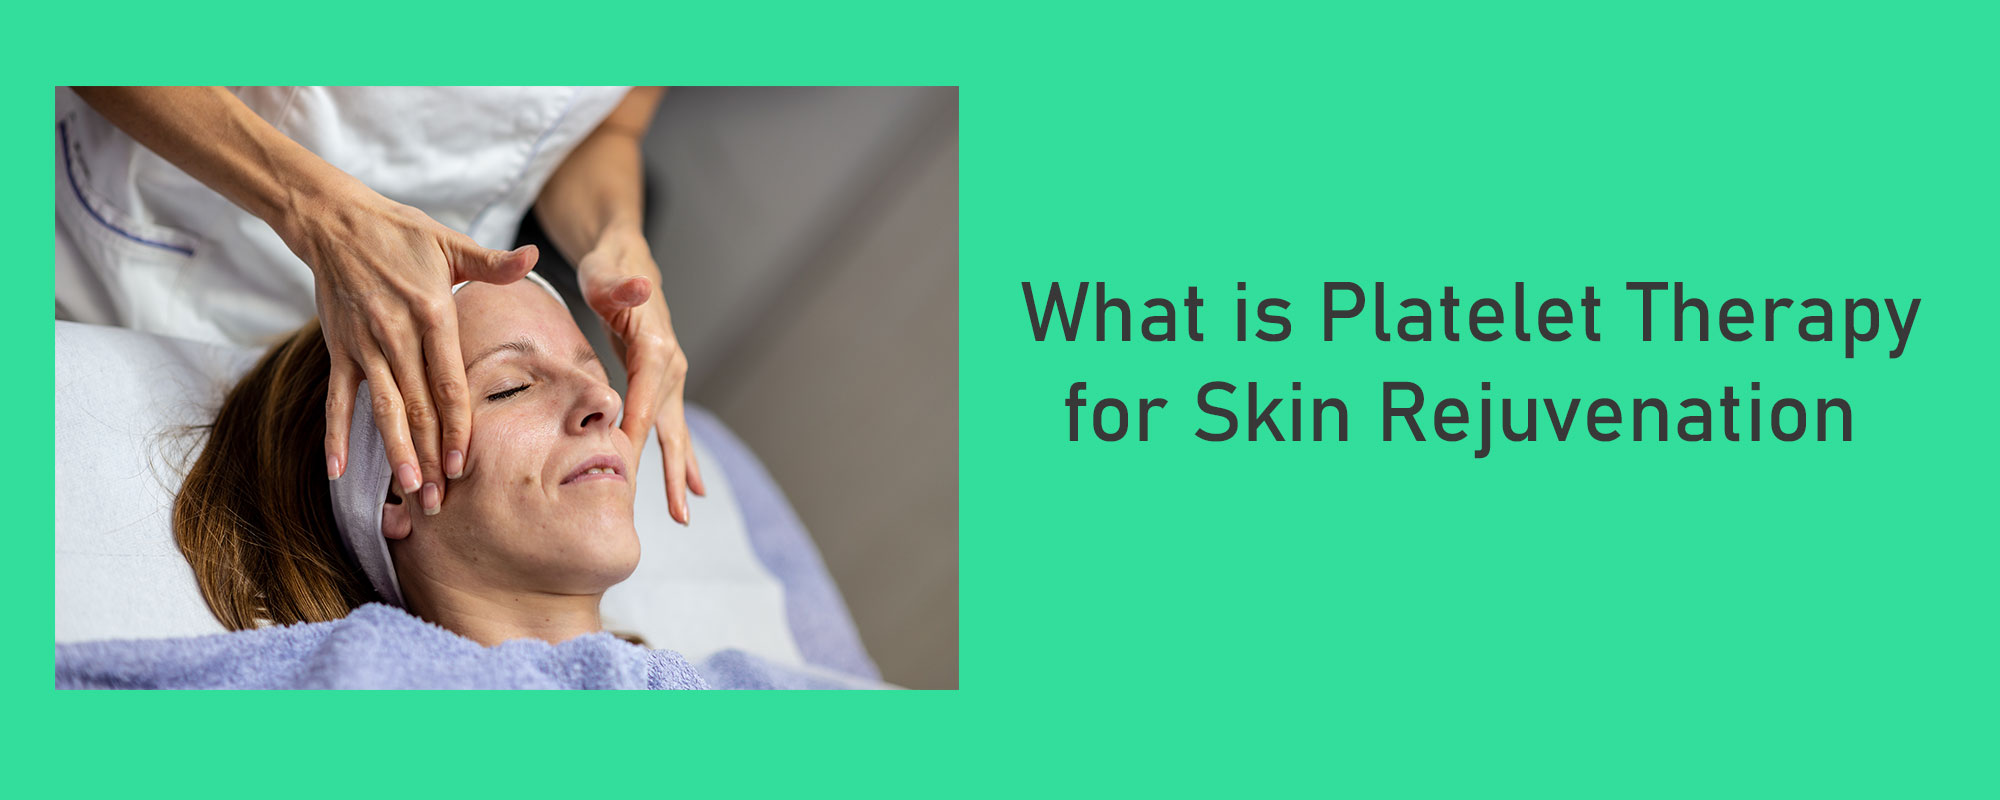 What is Platelet Therapy for Skin Rejuvenation? - 1